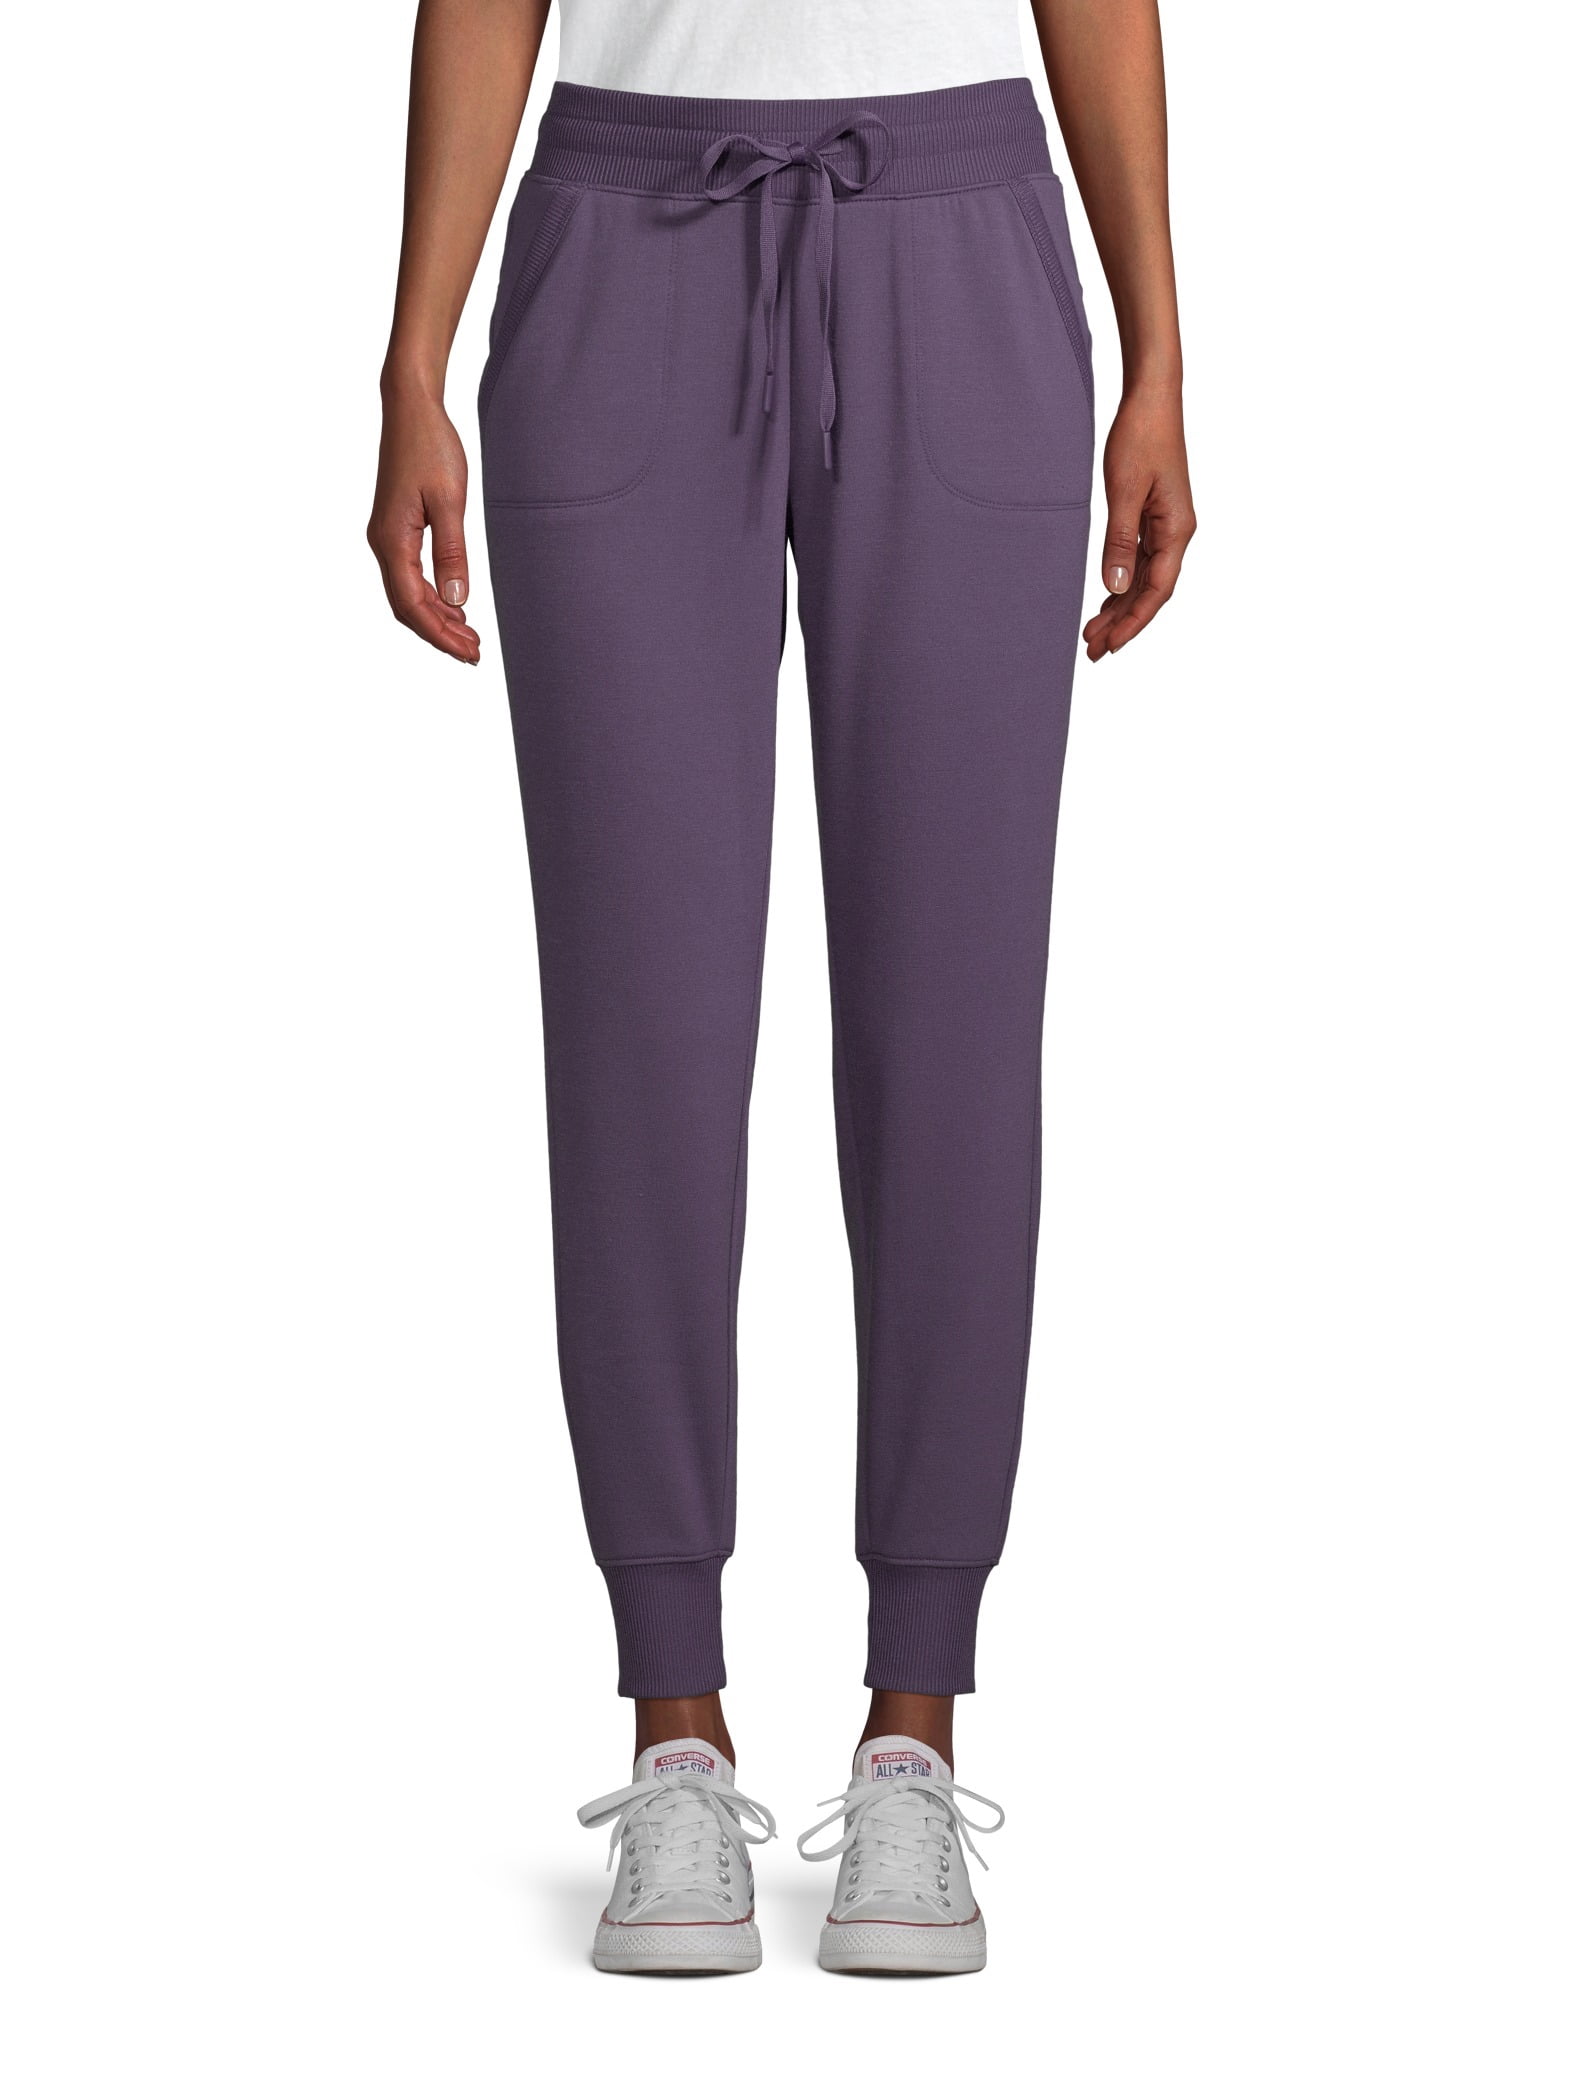 Athletic Works Women's Athleisure Soft Joggers Sweatpants